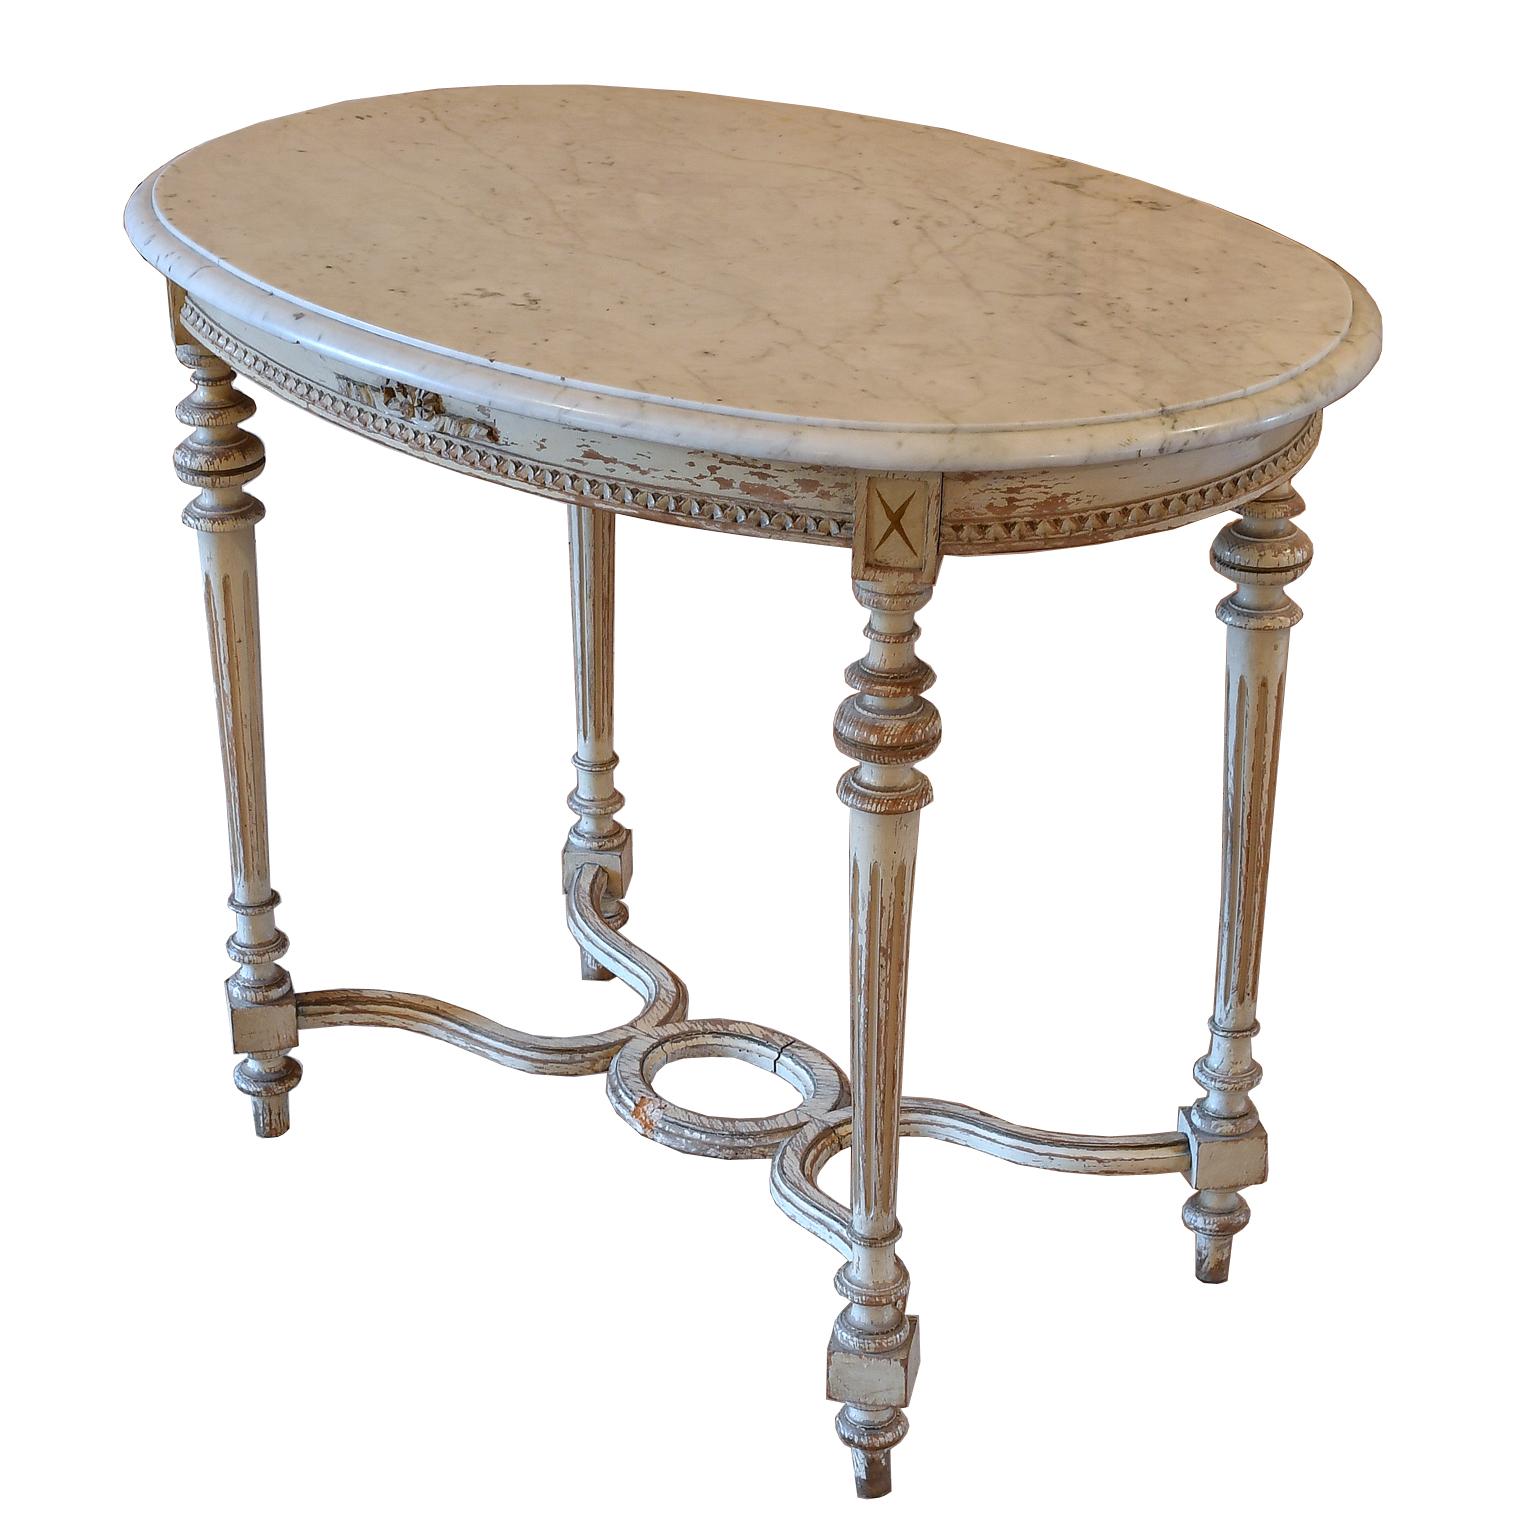 A lovely antique Louis XVI style salon table with painted Gustavian white/grey, distressed finish on wooden frame & white marble top with grey veining (likely Carrara marble) with ogee edge. Details include carved moldings and stretcher, with turned